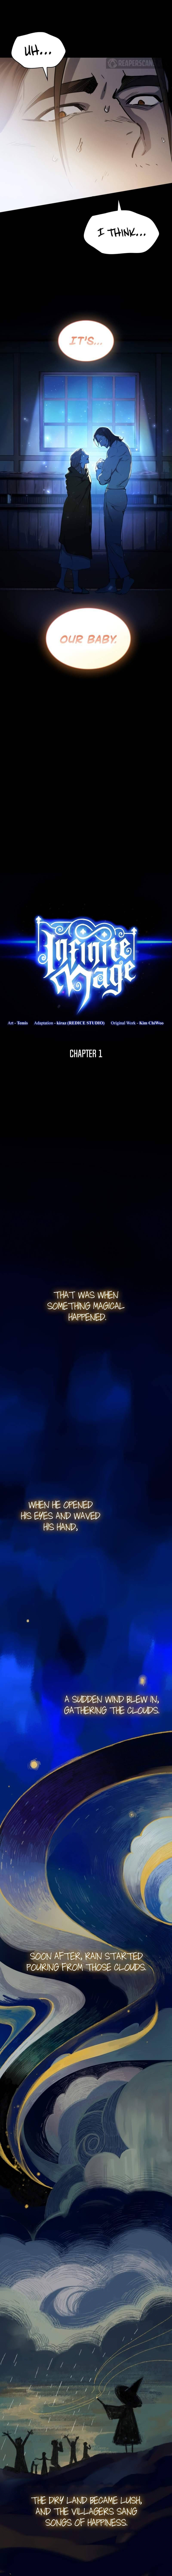 Infinite Mage Chapter 1 page 5